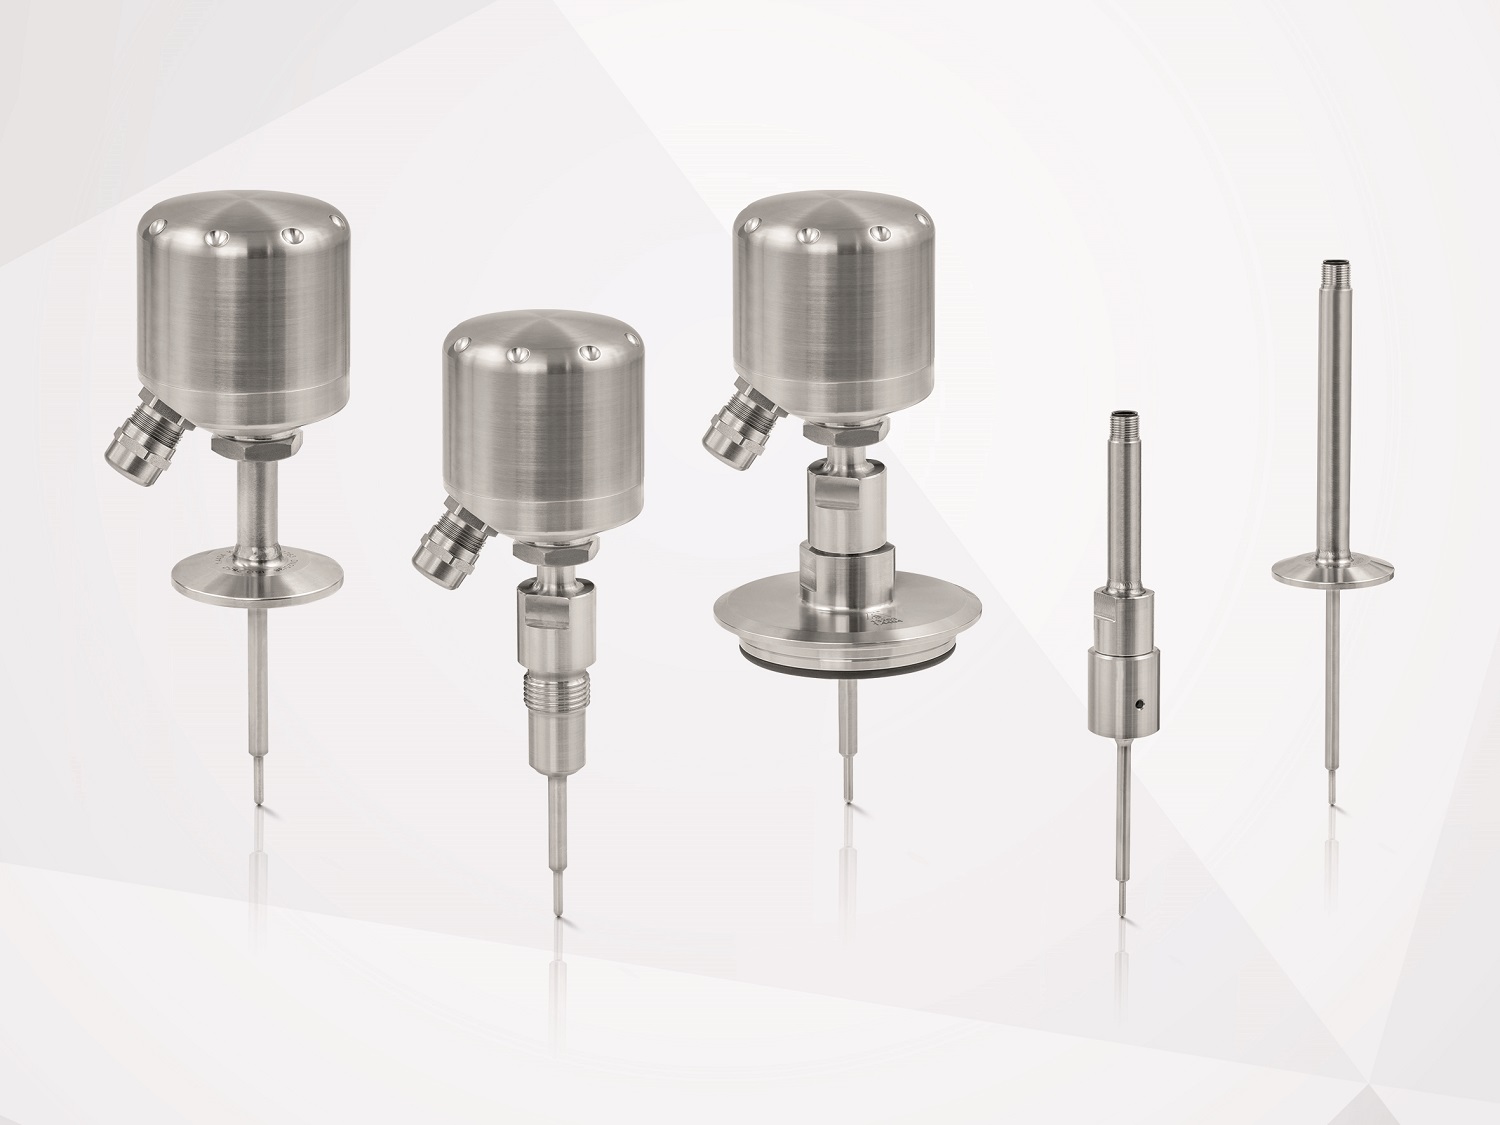 The new temperature sensors are designed for hygienic applications in the food and beverage industry